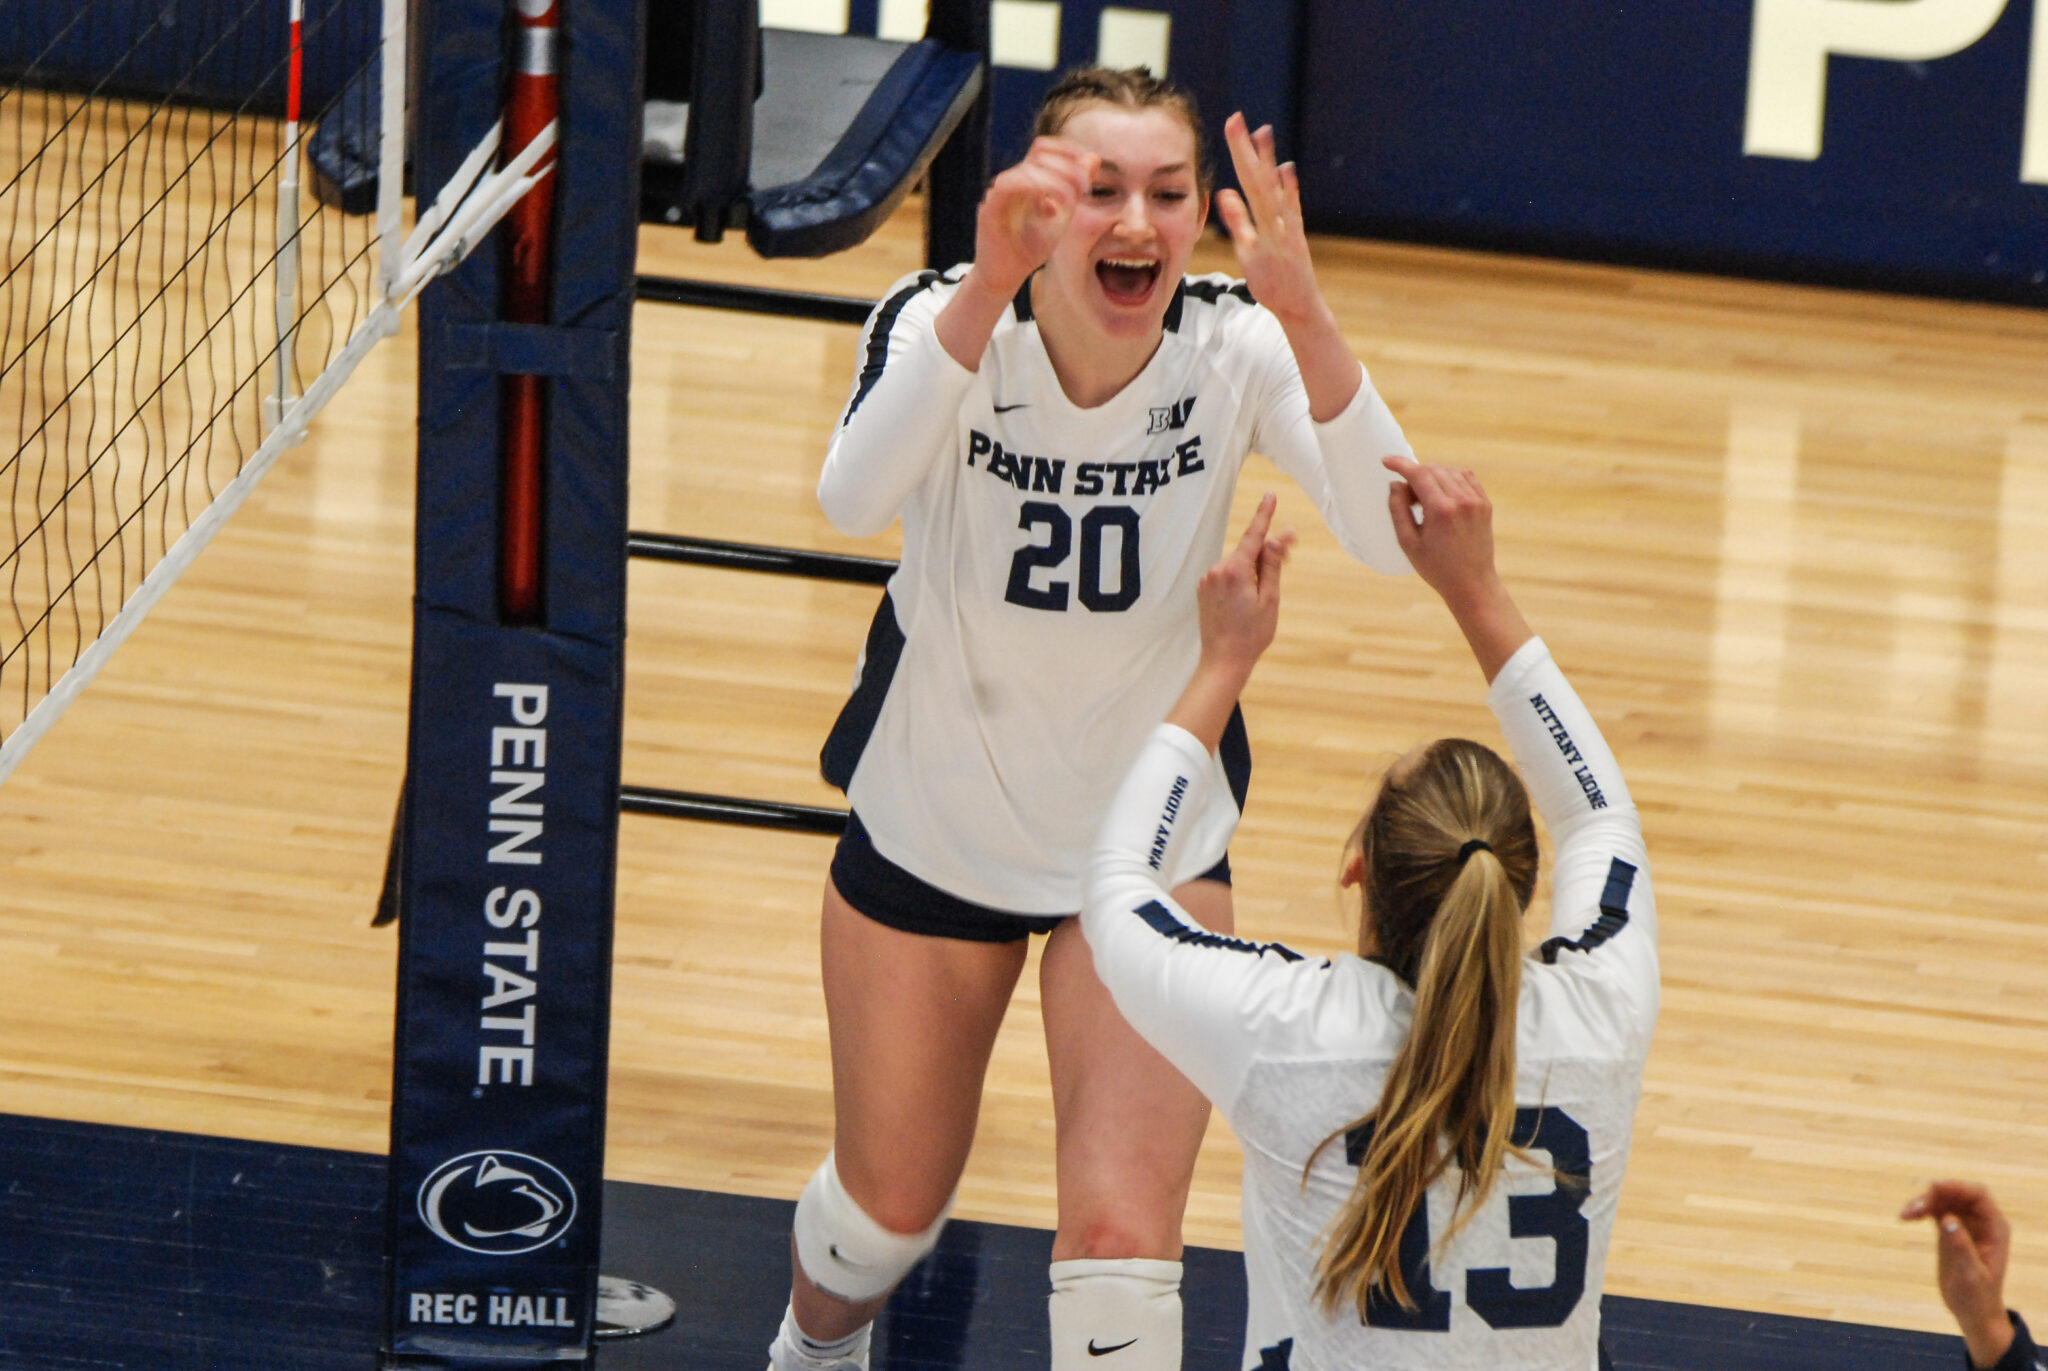 Penn State Volleyball Earns No. 13 Seed In NCAA Tournament